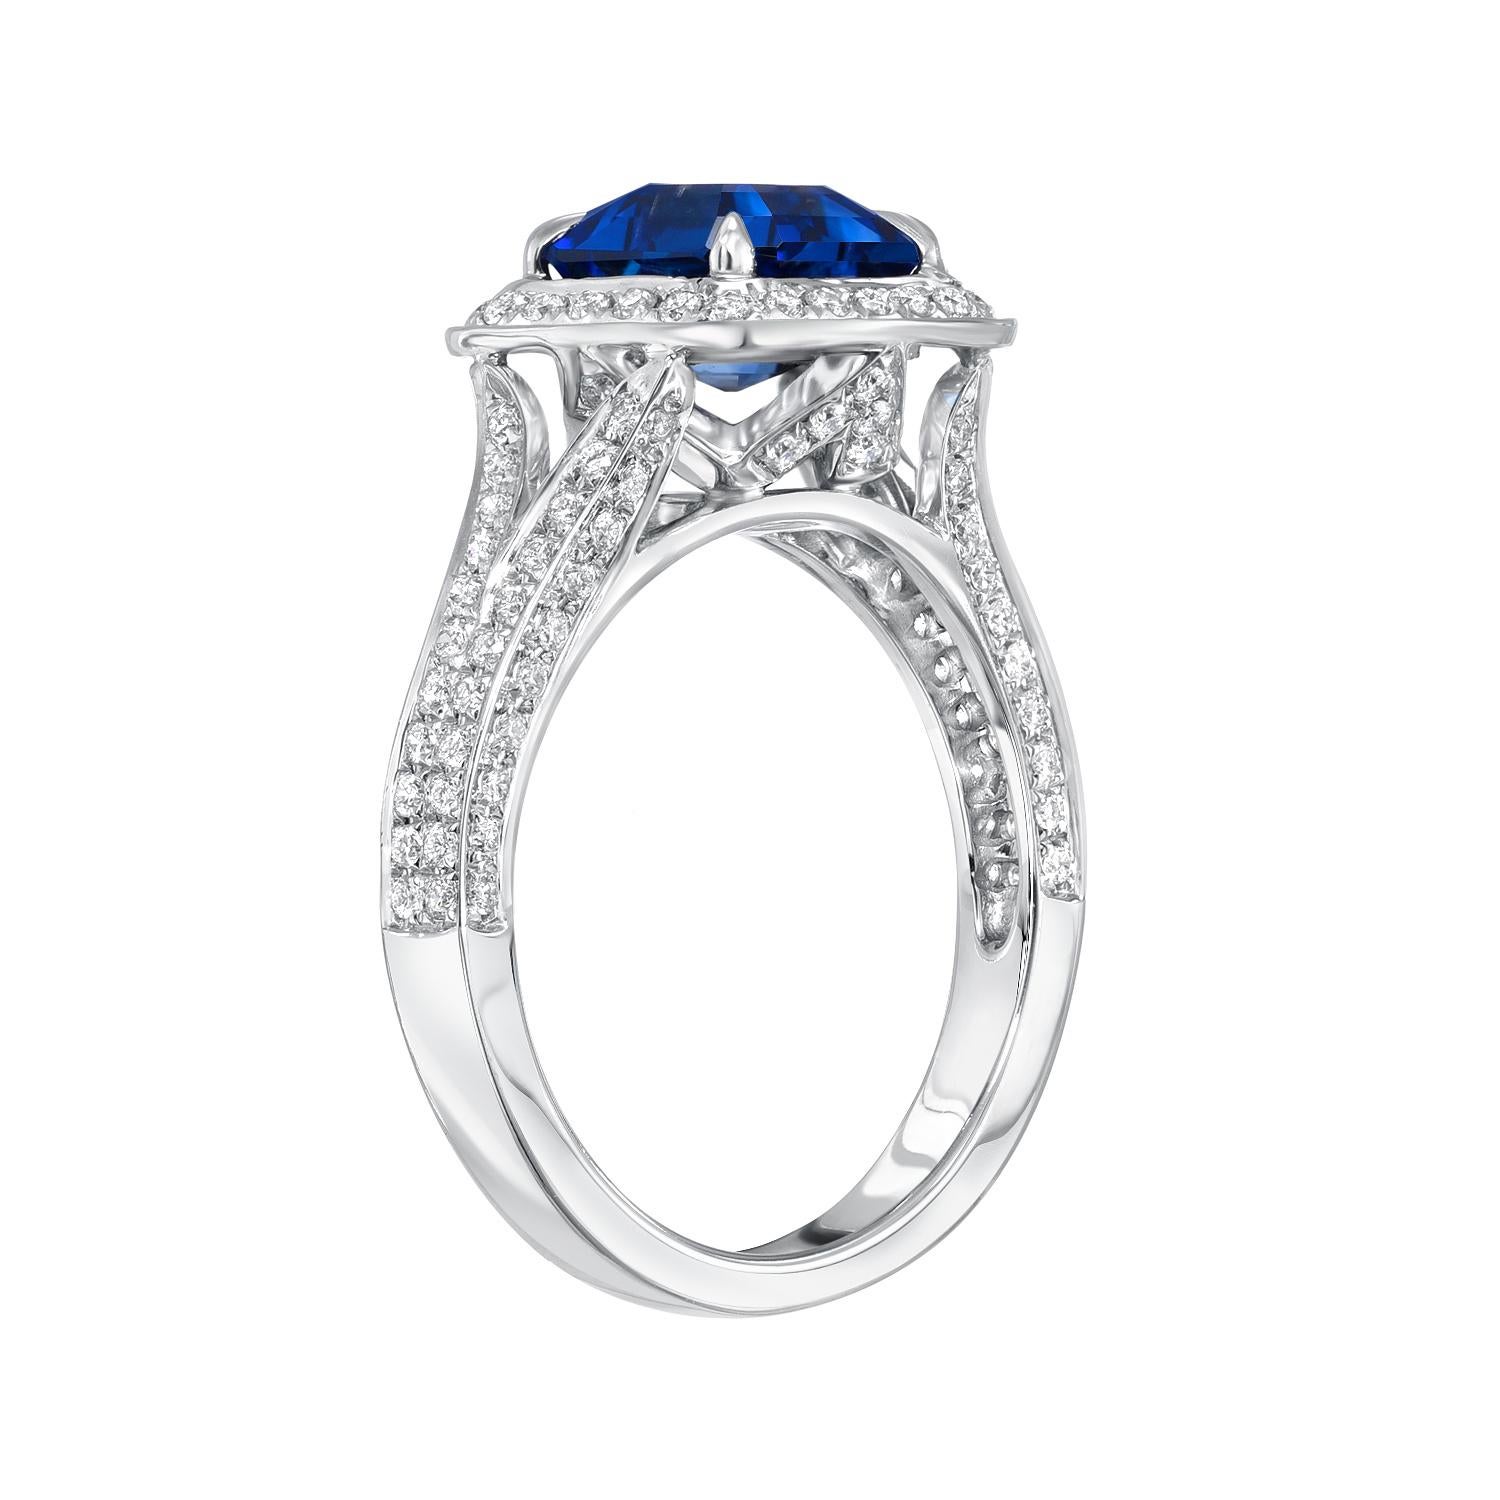 2.58 carat Royal Blue Sapphire square emerald-cut, 18K white gold ring, surrounded by round brilliant diamonds weighing a total of 0.57 carats. 
Ring size 6.5 Resizing is complementary upon request.
Crafted by extremely skilled hands in the